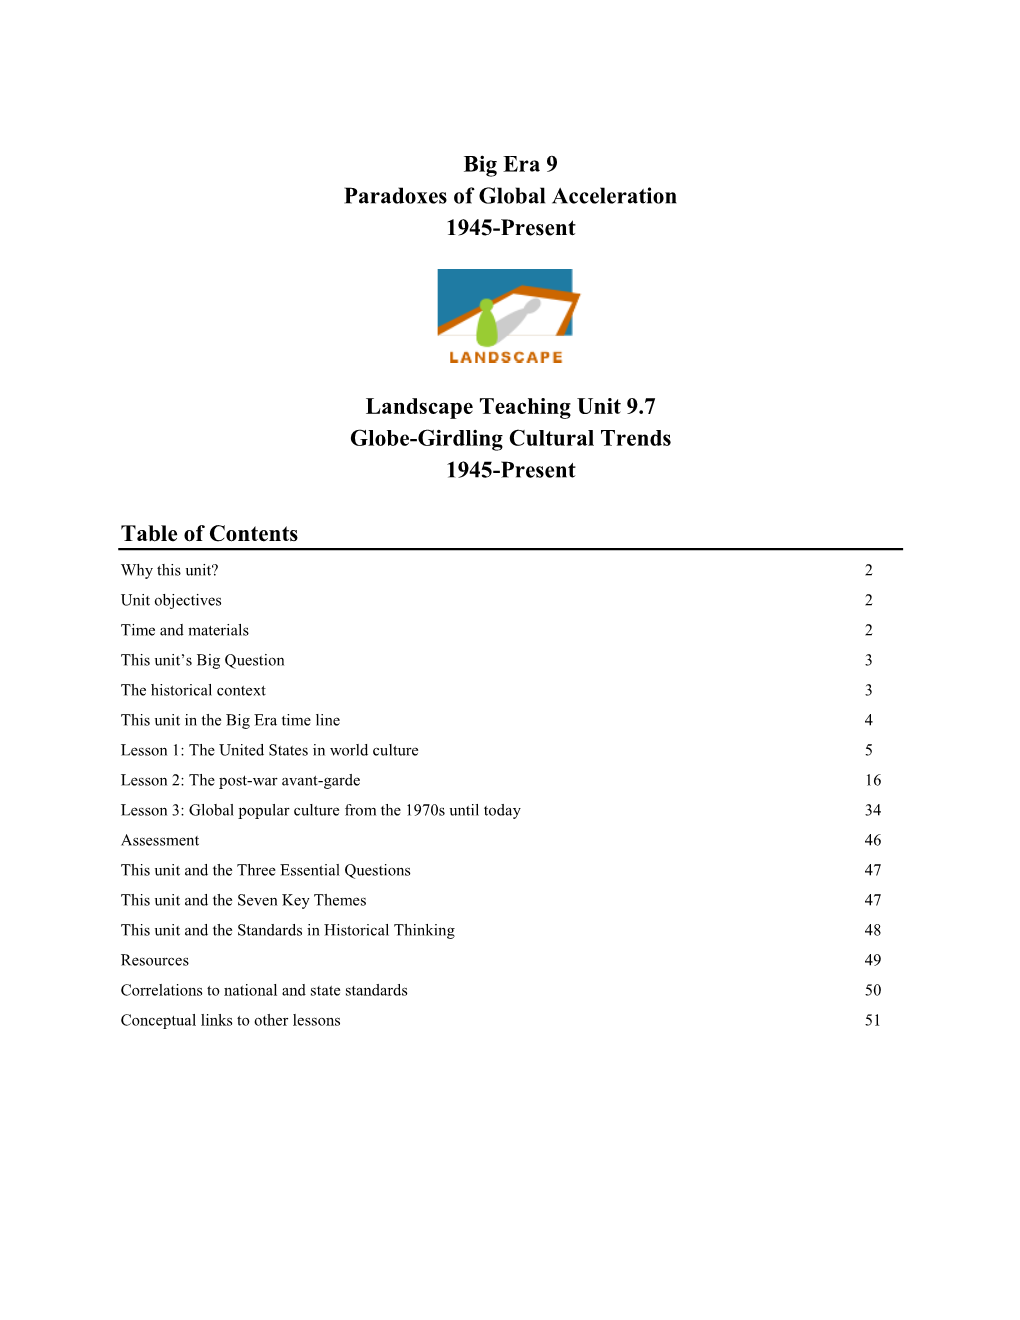 Complete Teaching Unit in PDF Format